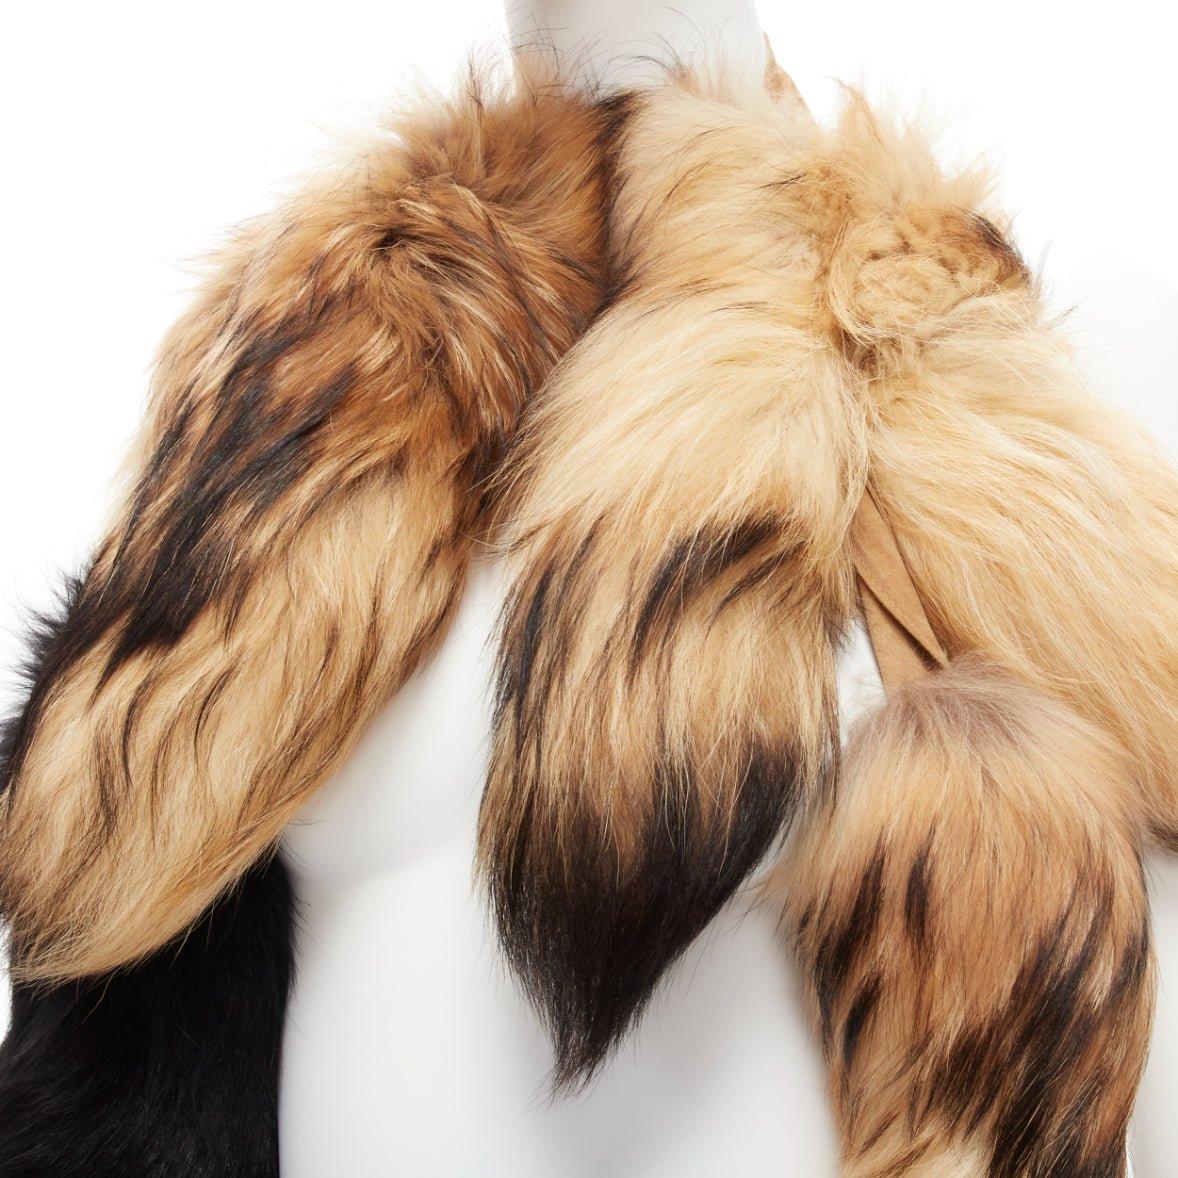 rare MAISON MARTIN MARGIELA Vintage dark brown real fur leather shawl scarf
Reference: TGAS/D00449
Brand: Maison Margiela
Designer: Martin Margiela
Material: Fur, Leather
Color: Beige, Black
Pattern: Solid
Extra Details: Hook and eye closure.
Made